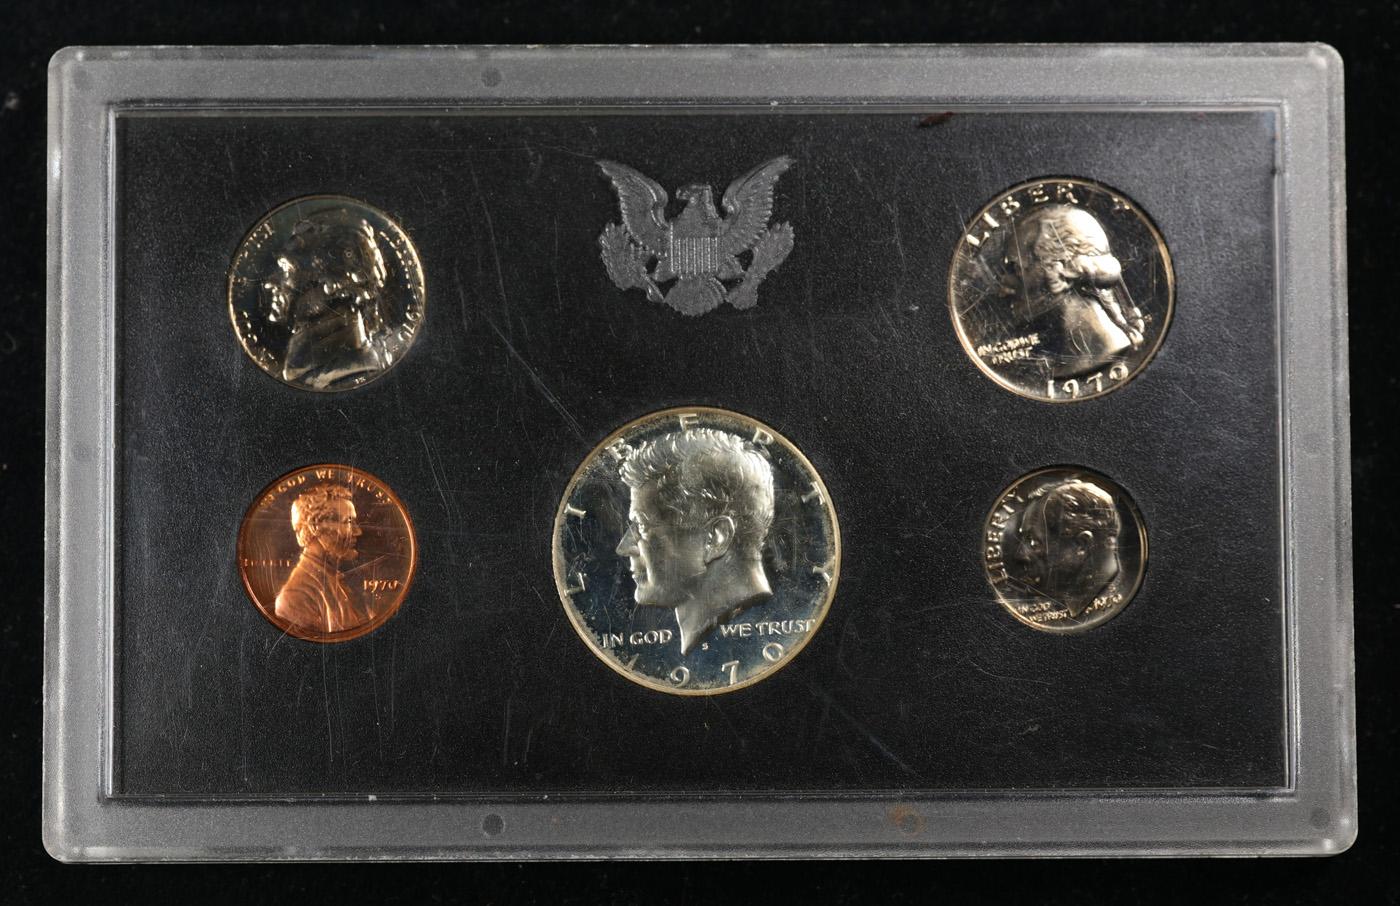 1970 United States Mint Proof Set 5 Coins - No Outer Box